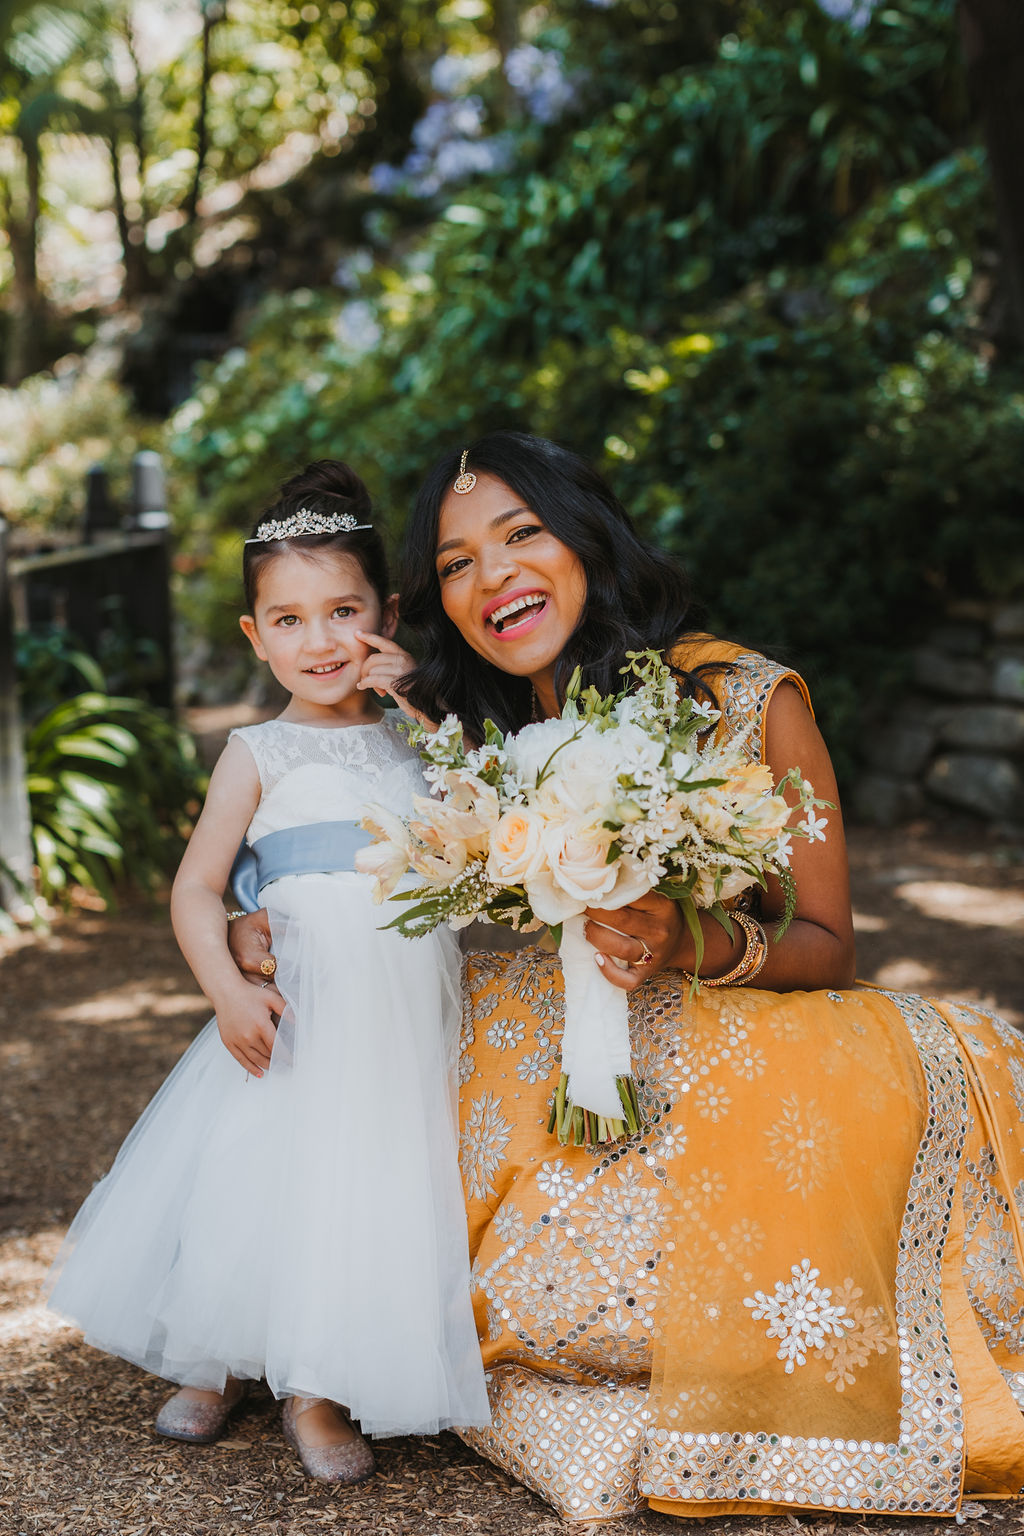 bride in orange marigold colored wedding sari holds bouquet of white and orange flowers during portraits with flower girl in white dress and tiara